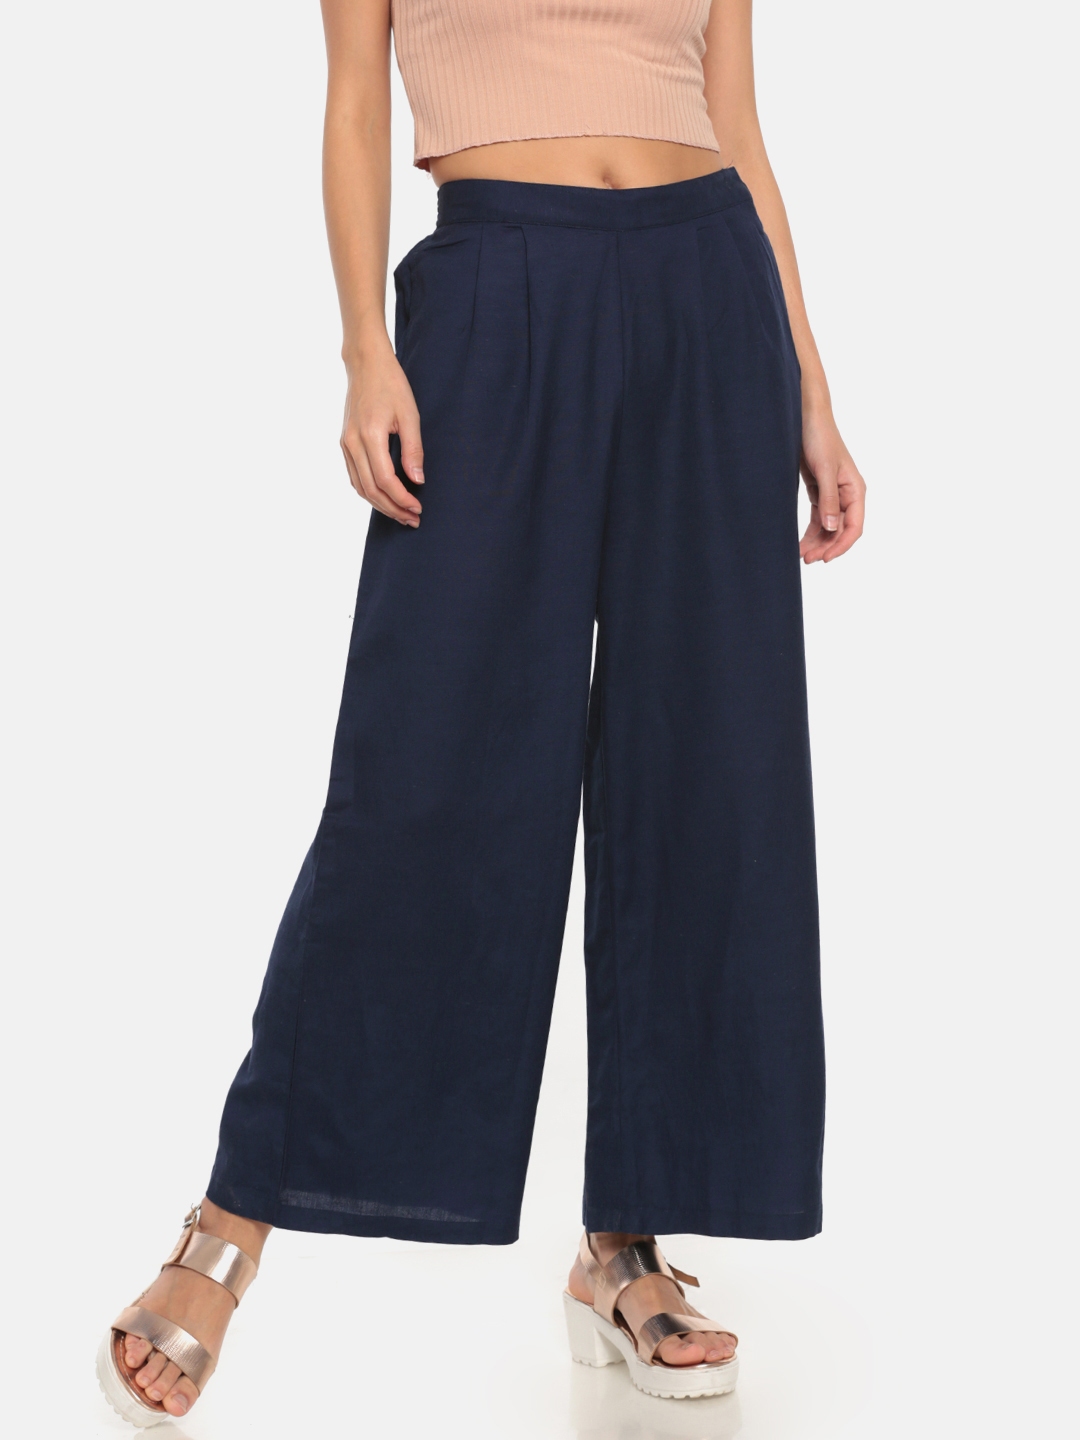 Buy Rayon Palazzo Pants For Women Online at Best Price  Apella